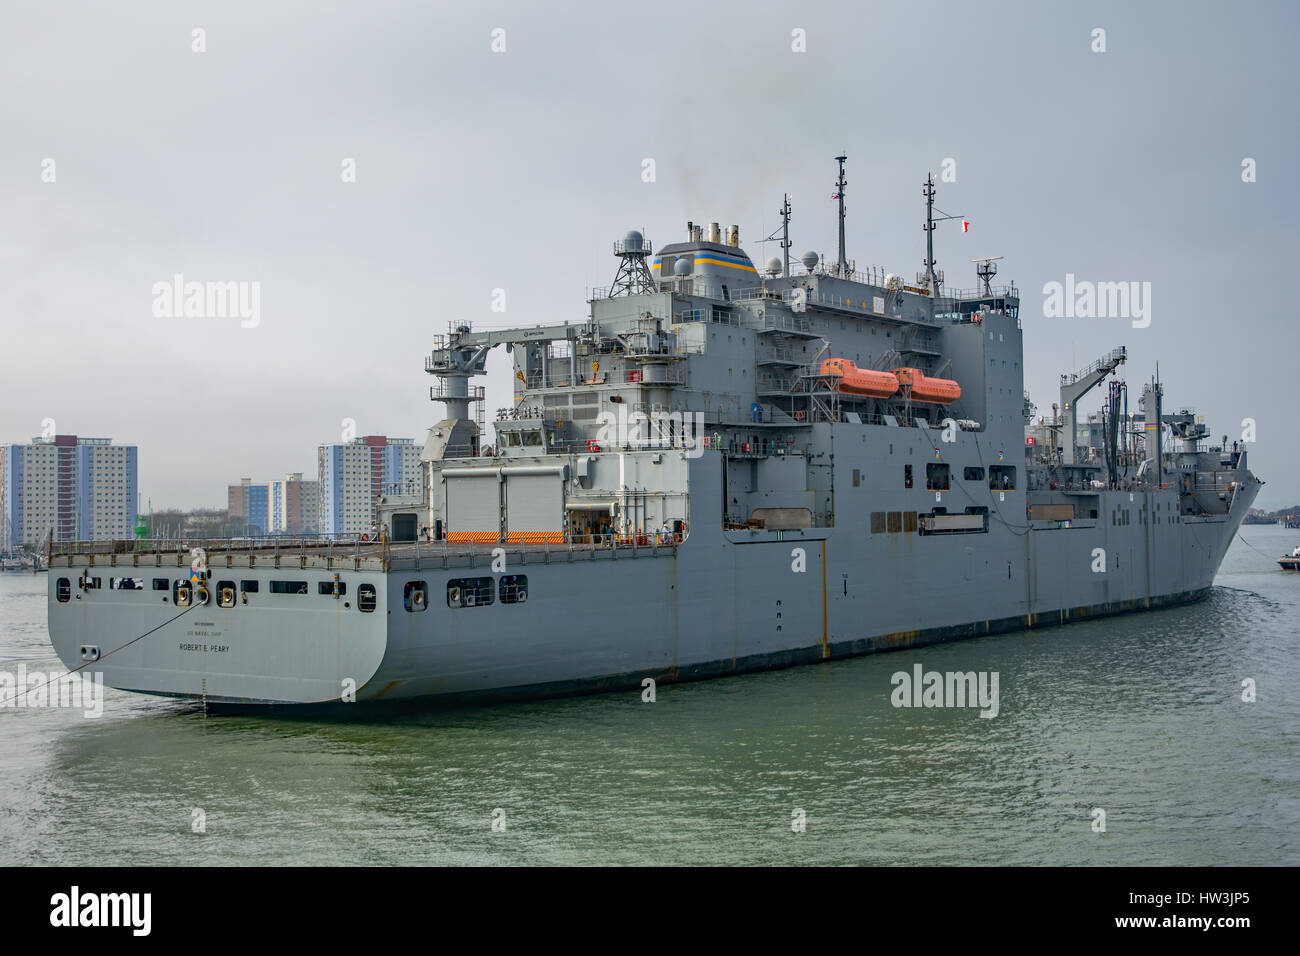 USNS Robert E Peary (T-AKE-5) a United States Navy supply ship at Portsmouth, UK on the 18th March 2017. Stock Photo